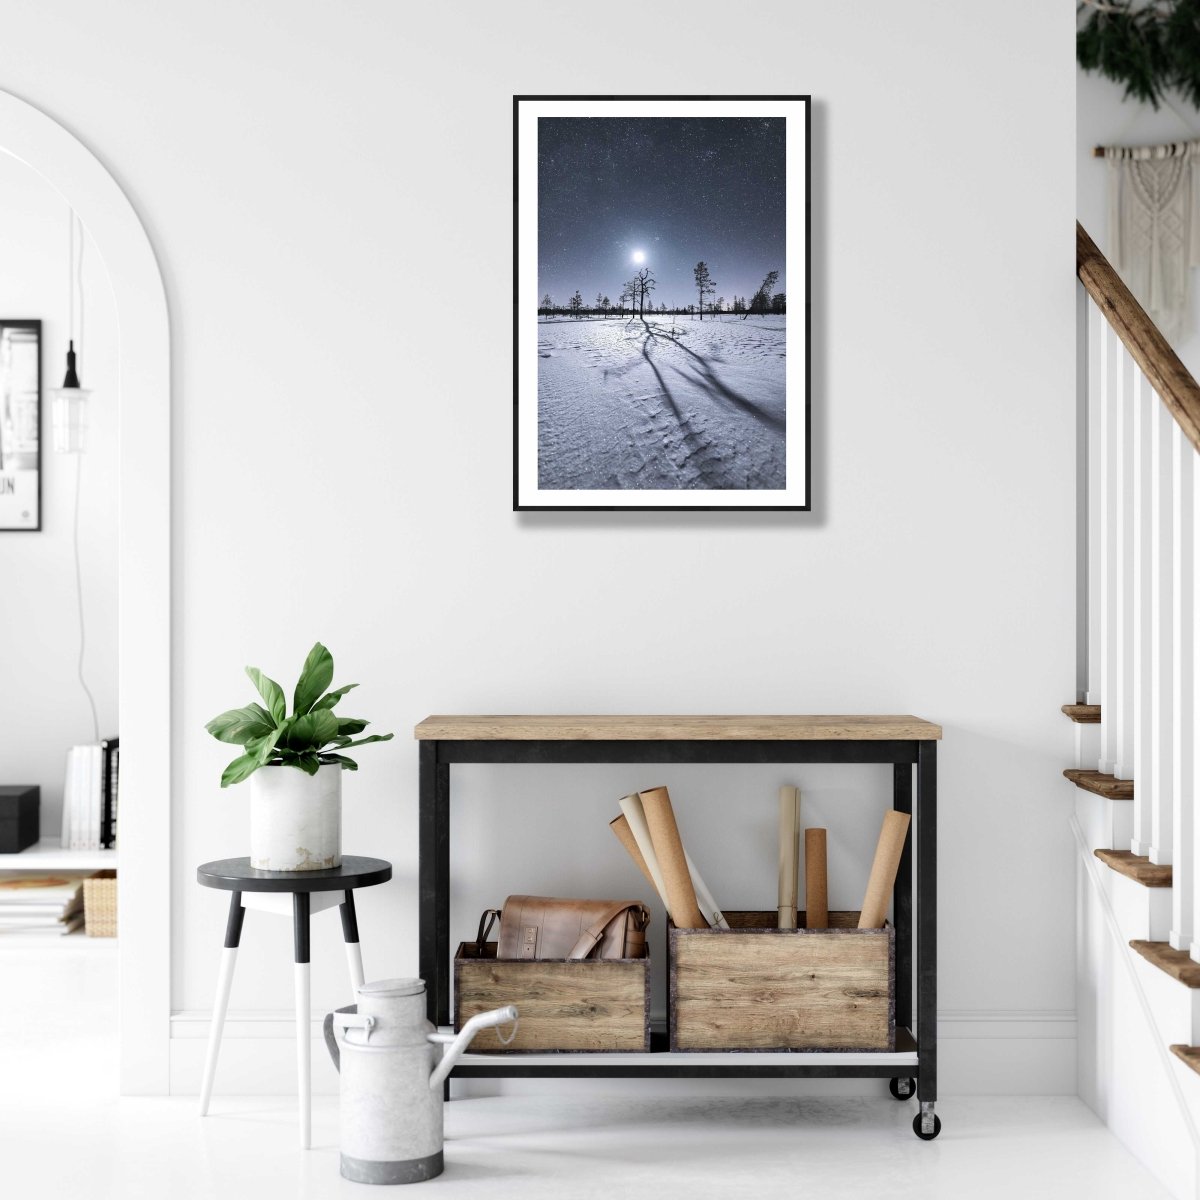 Framed photo of magical winter night in northern marshy forest, white living room wall.